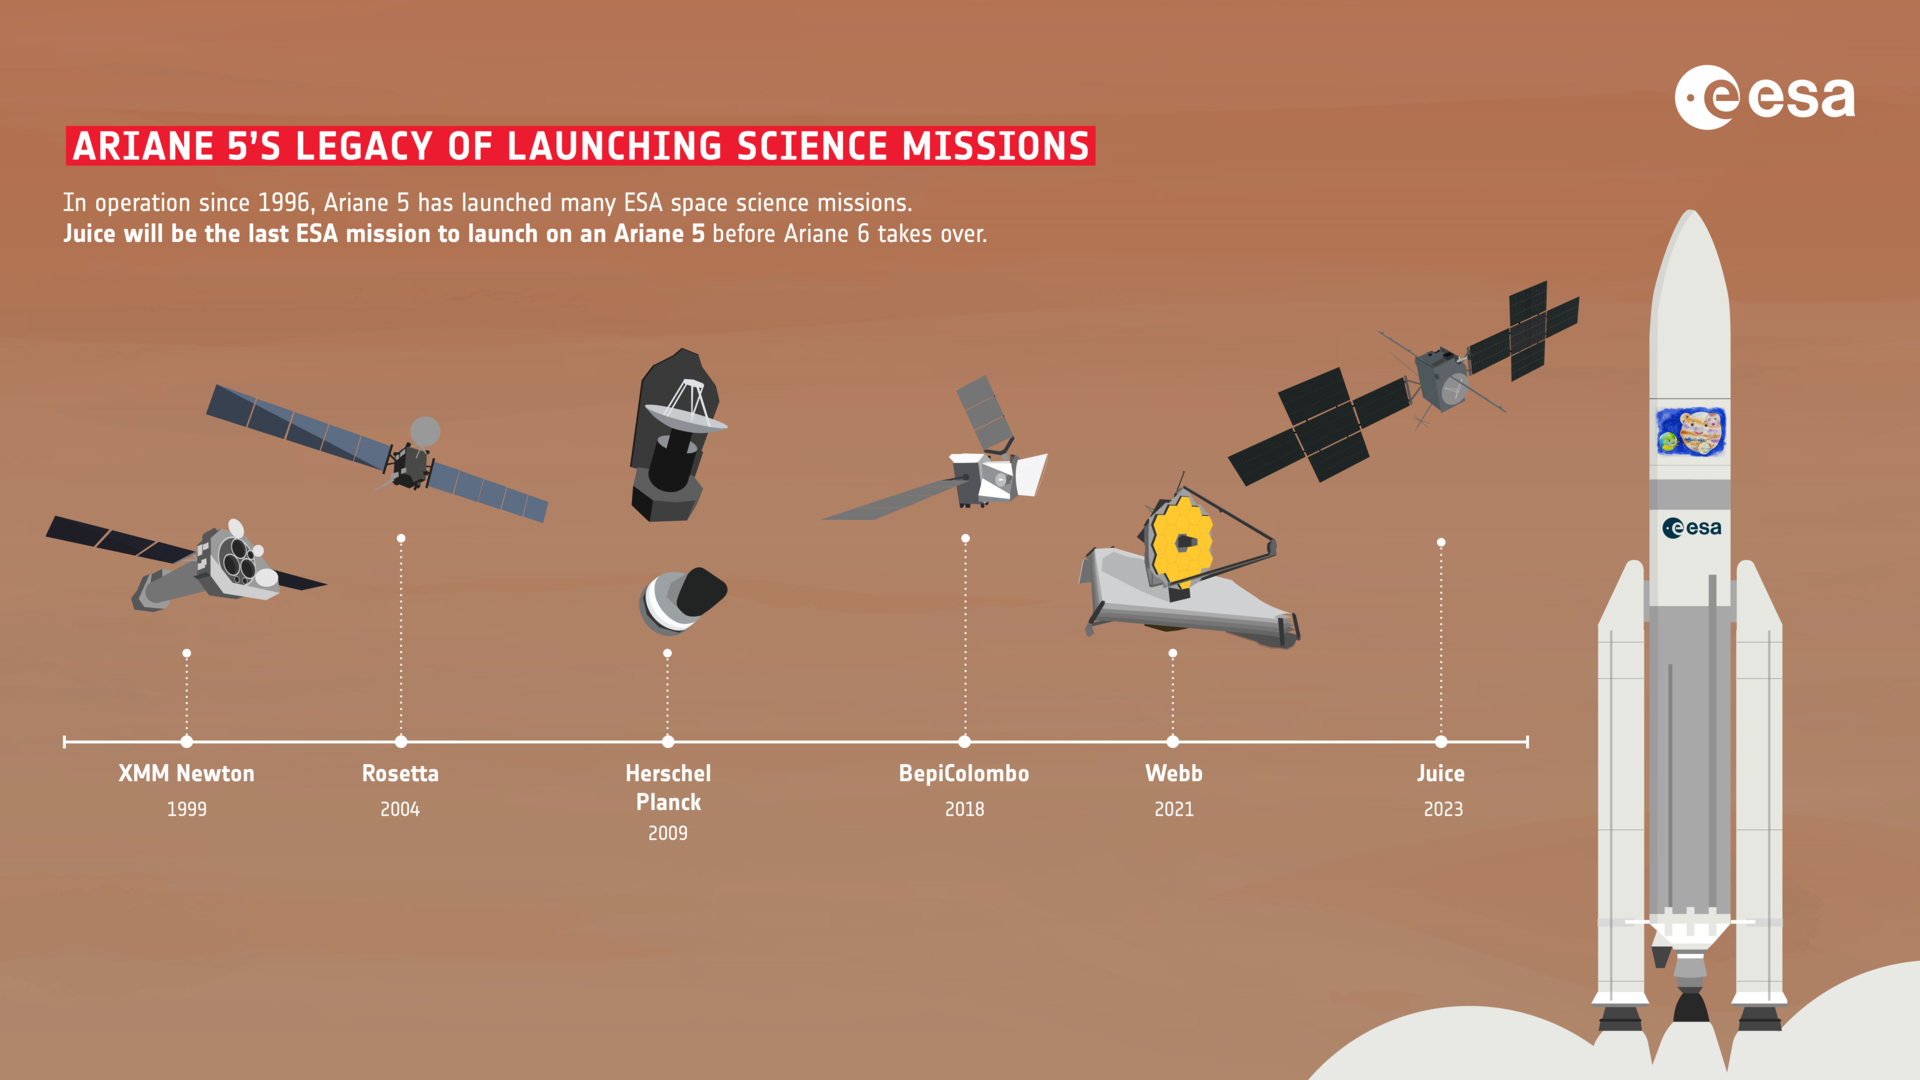 Ariane 5's legacy of launching science missions - ESA